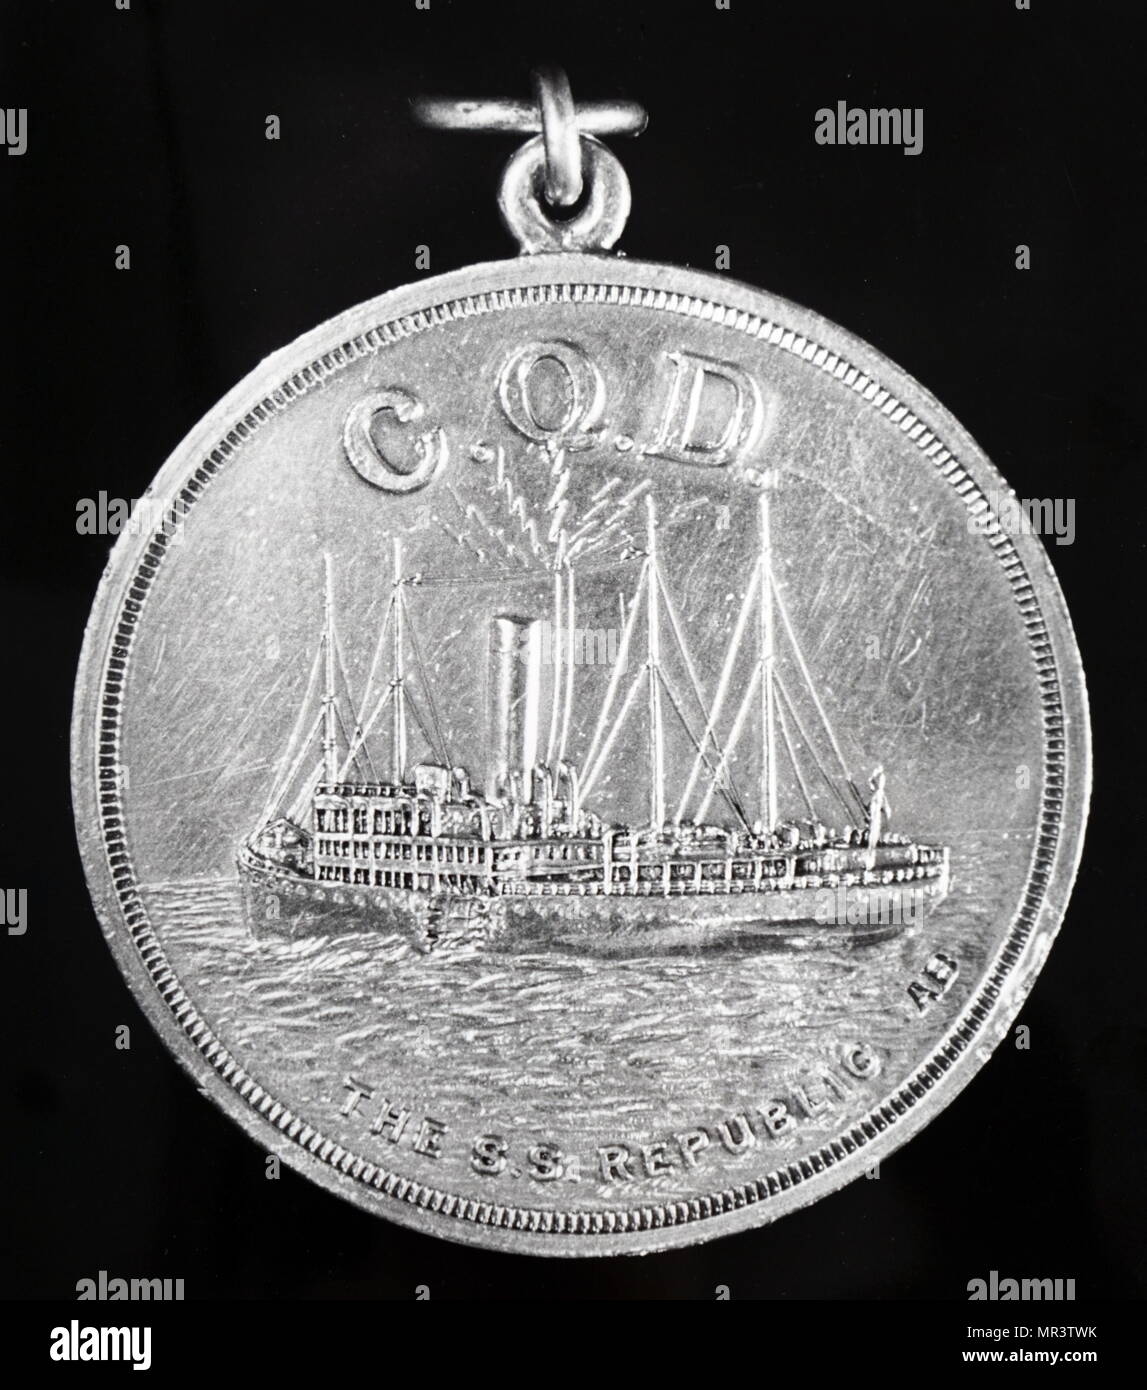 Silver medal struck to commemorate the first rescue at scene at sea brought about by a message sent by wireless telegraphy - 24 January 1909. The picture shows the SS Republic, after being struck in side by the SS Baltic sending a message. C.Q.D. was the emergency call sign before S.O.S. was adopted. Dated 20th century Stock Photo